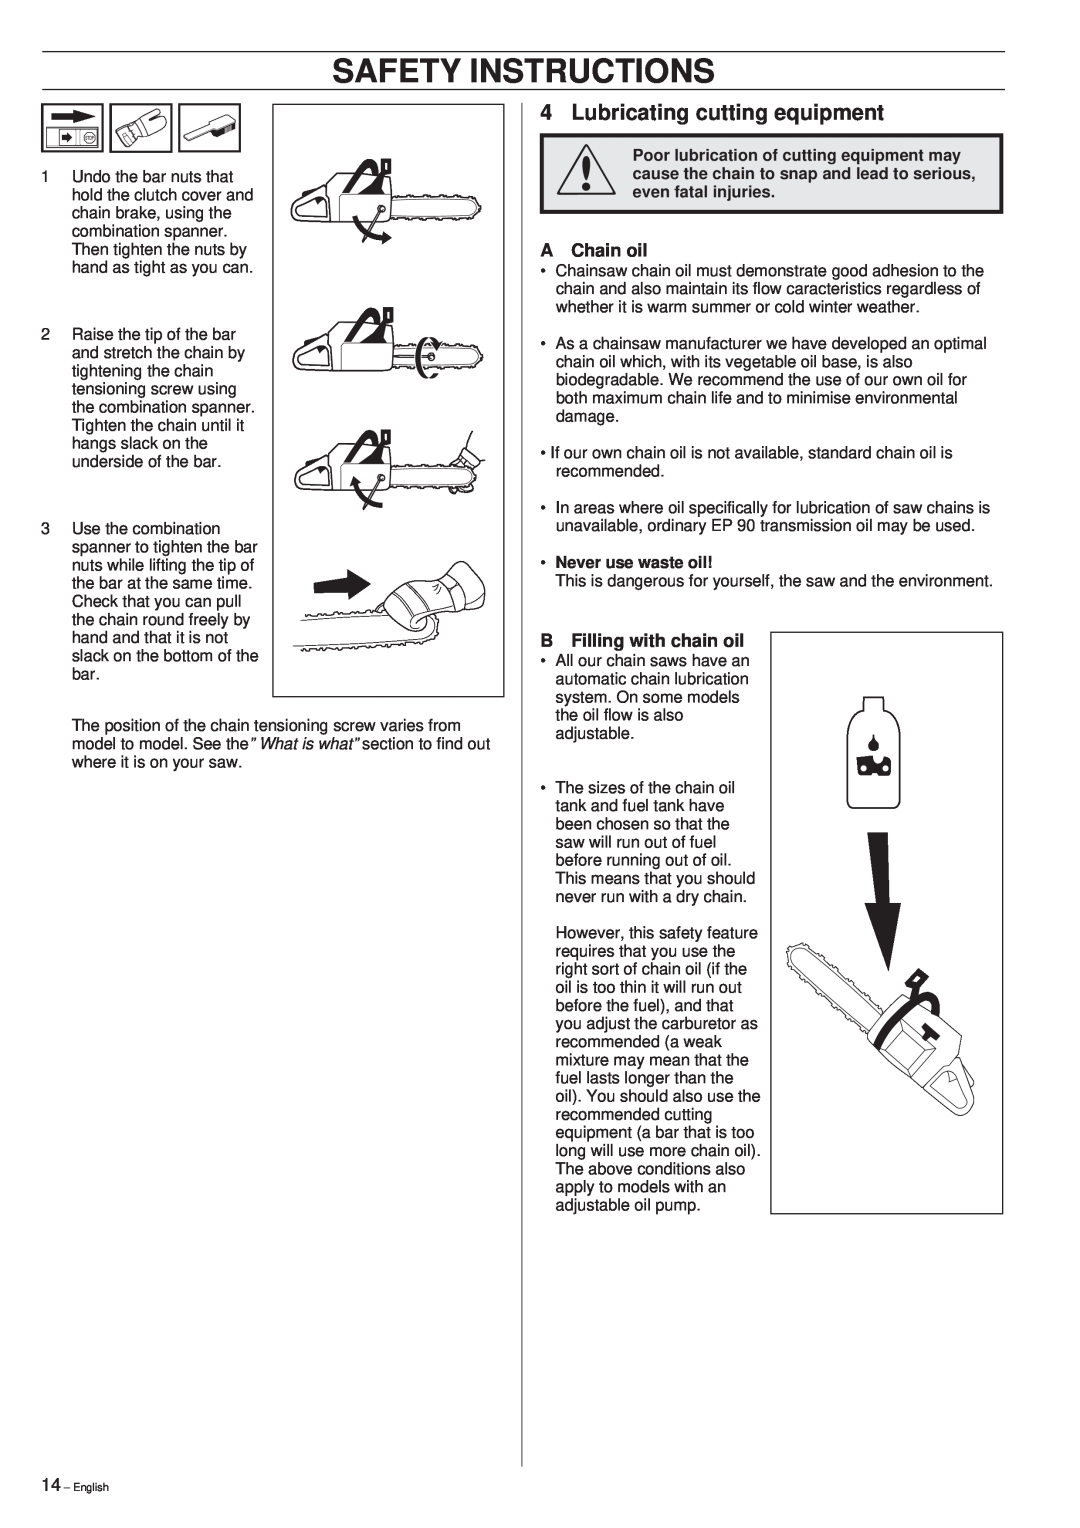 Husqvarna 261 manual Safety Instructions, Lubricating cutting equipment, A Chain oil, B Filling with chain oil 